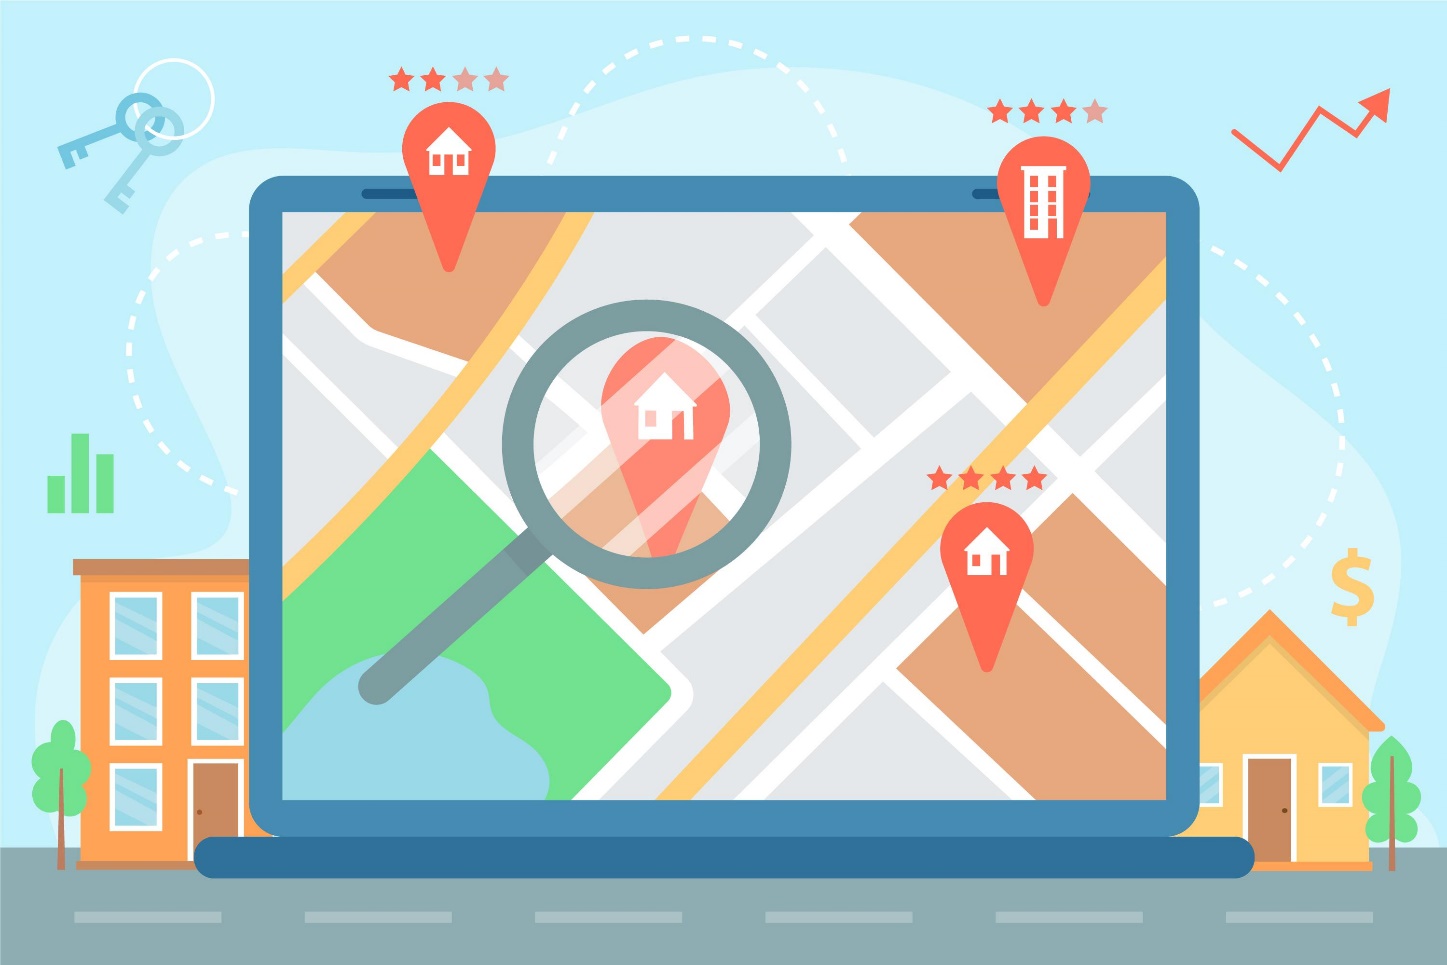 Registering your business on Google Maps